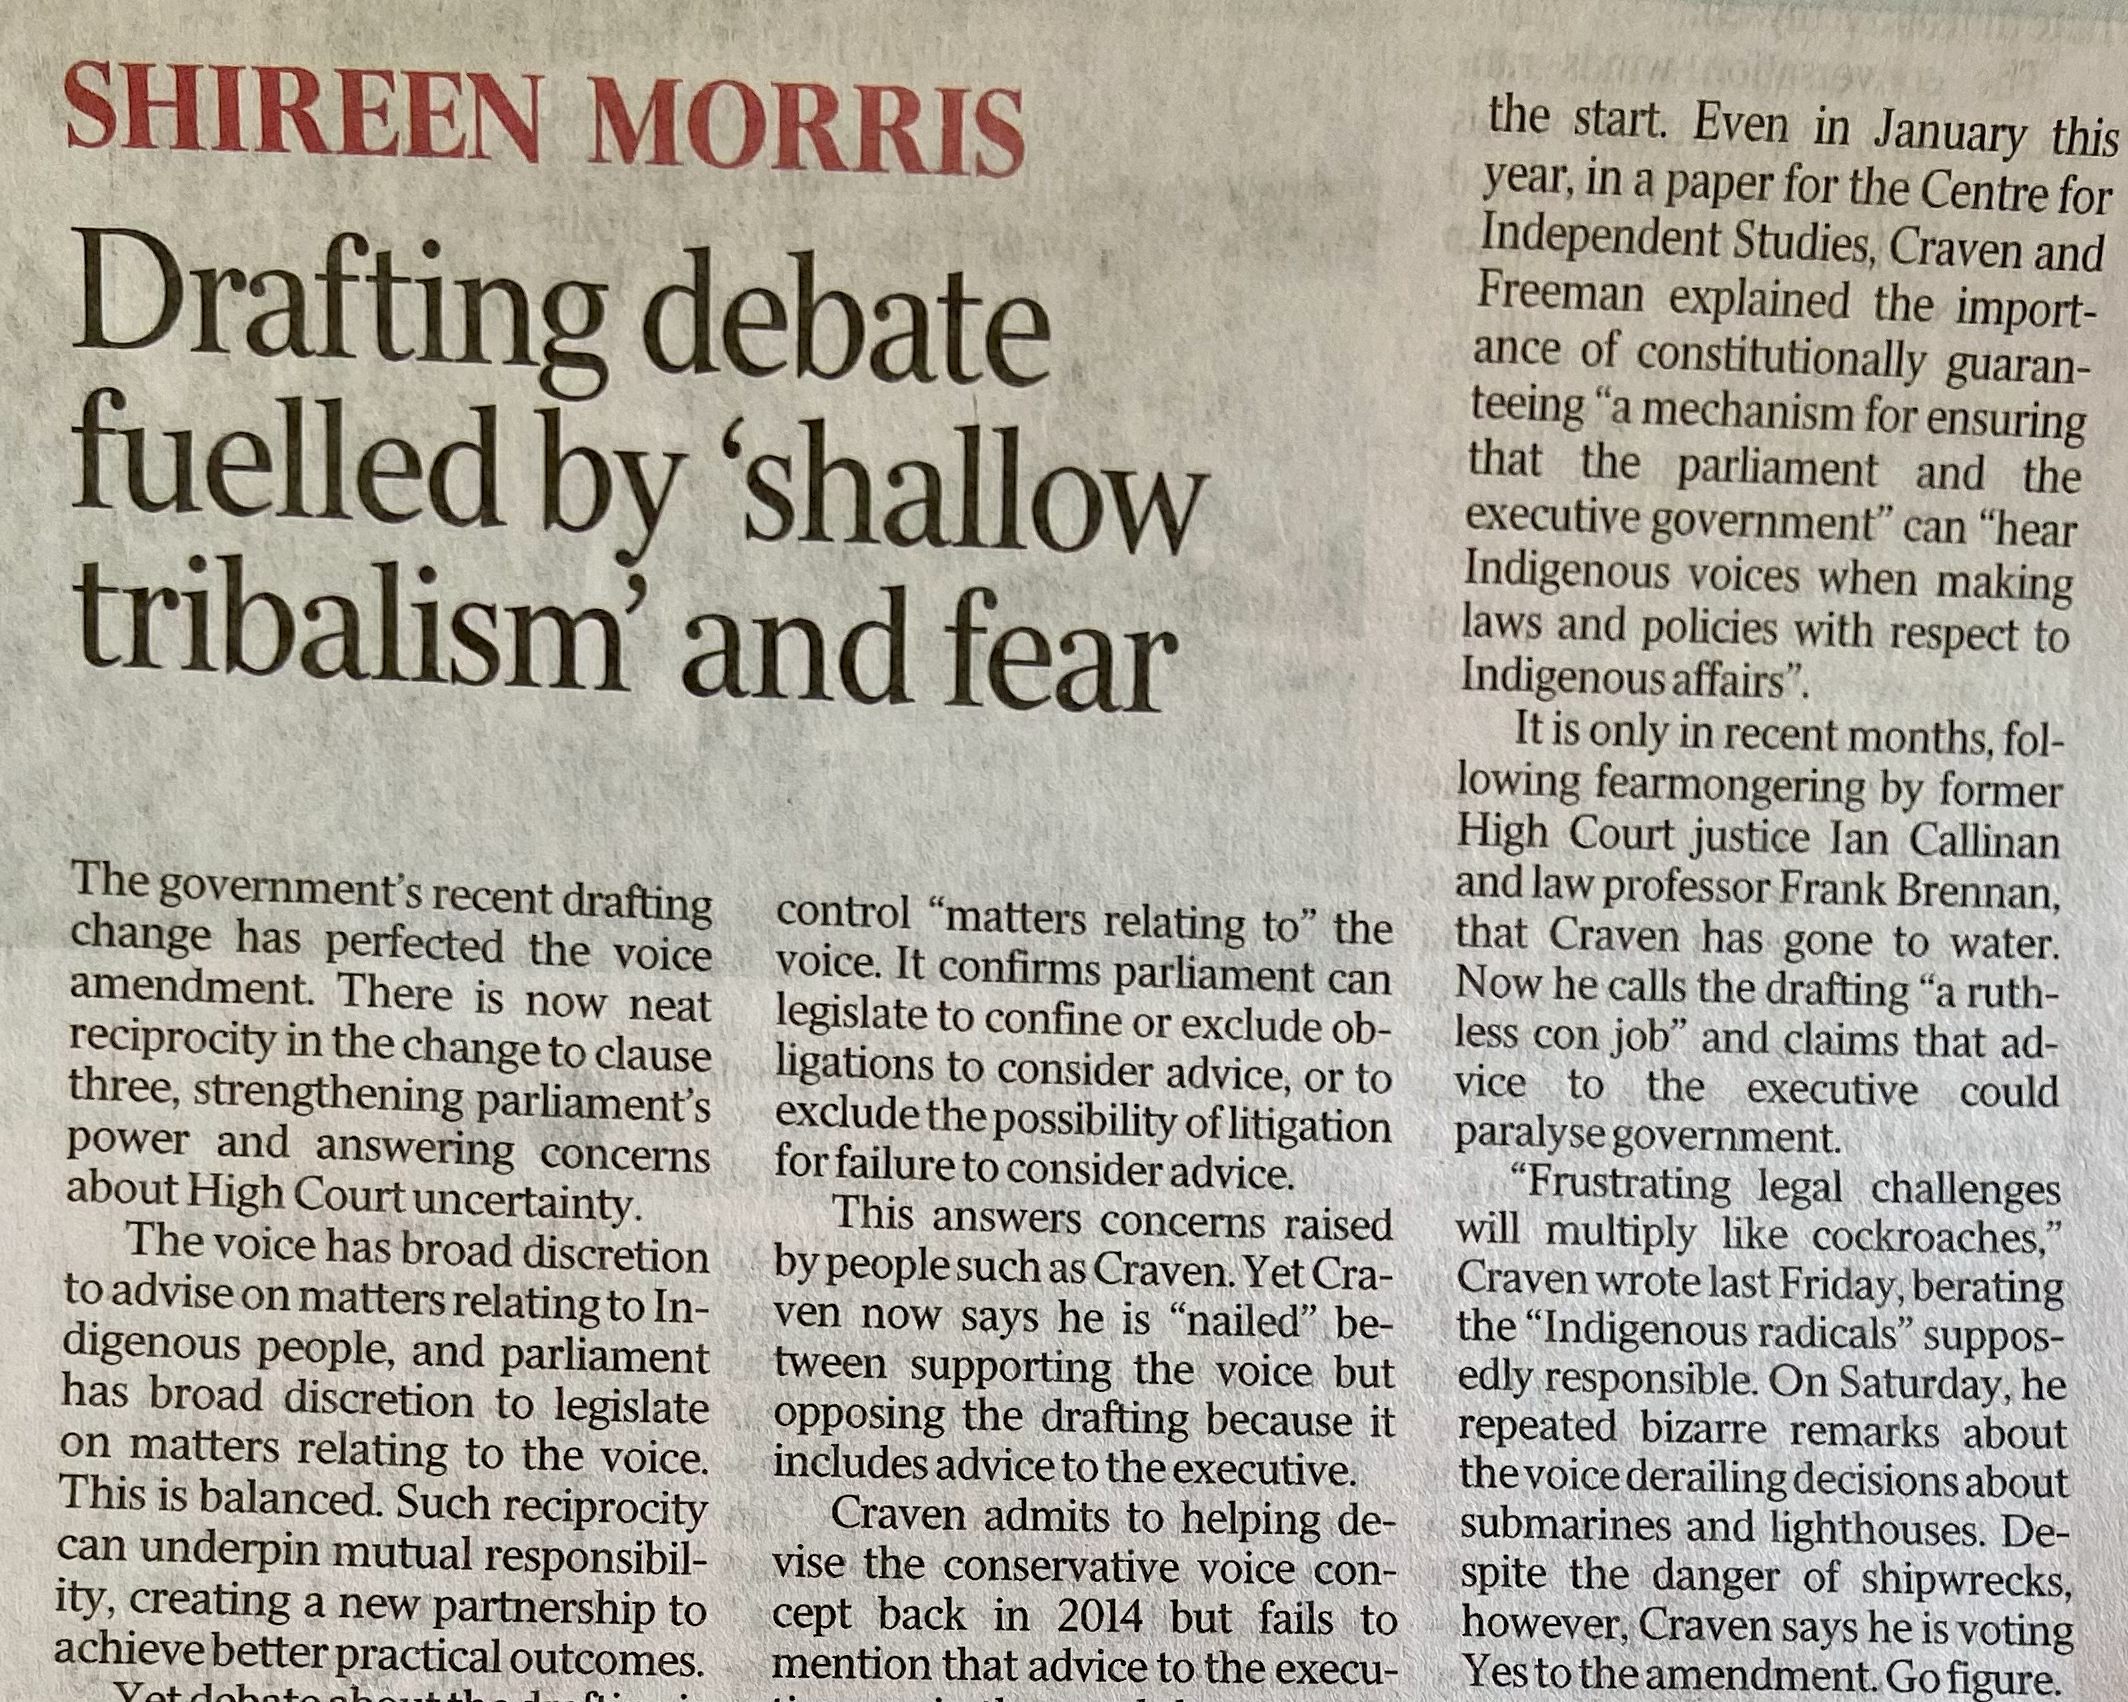 Drafting debate fuelled by shallow tribalism and fear